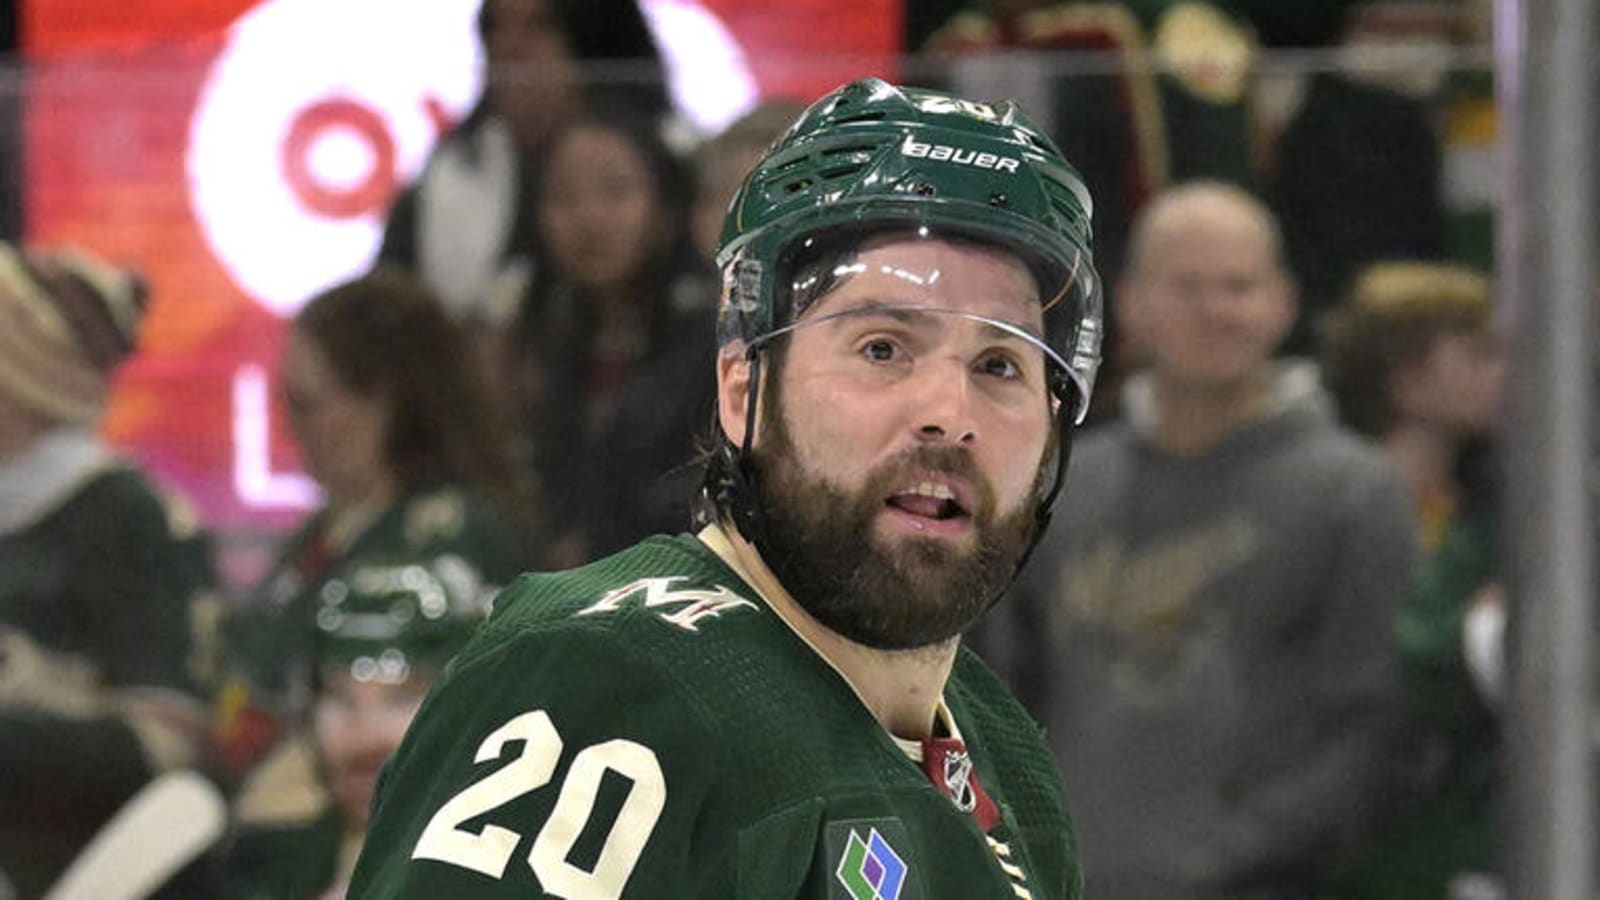 Veteran Wild winger to miss extended time after back surgery